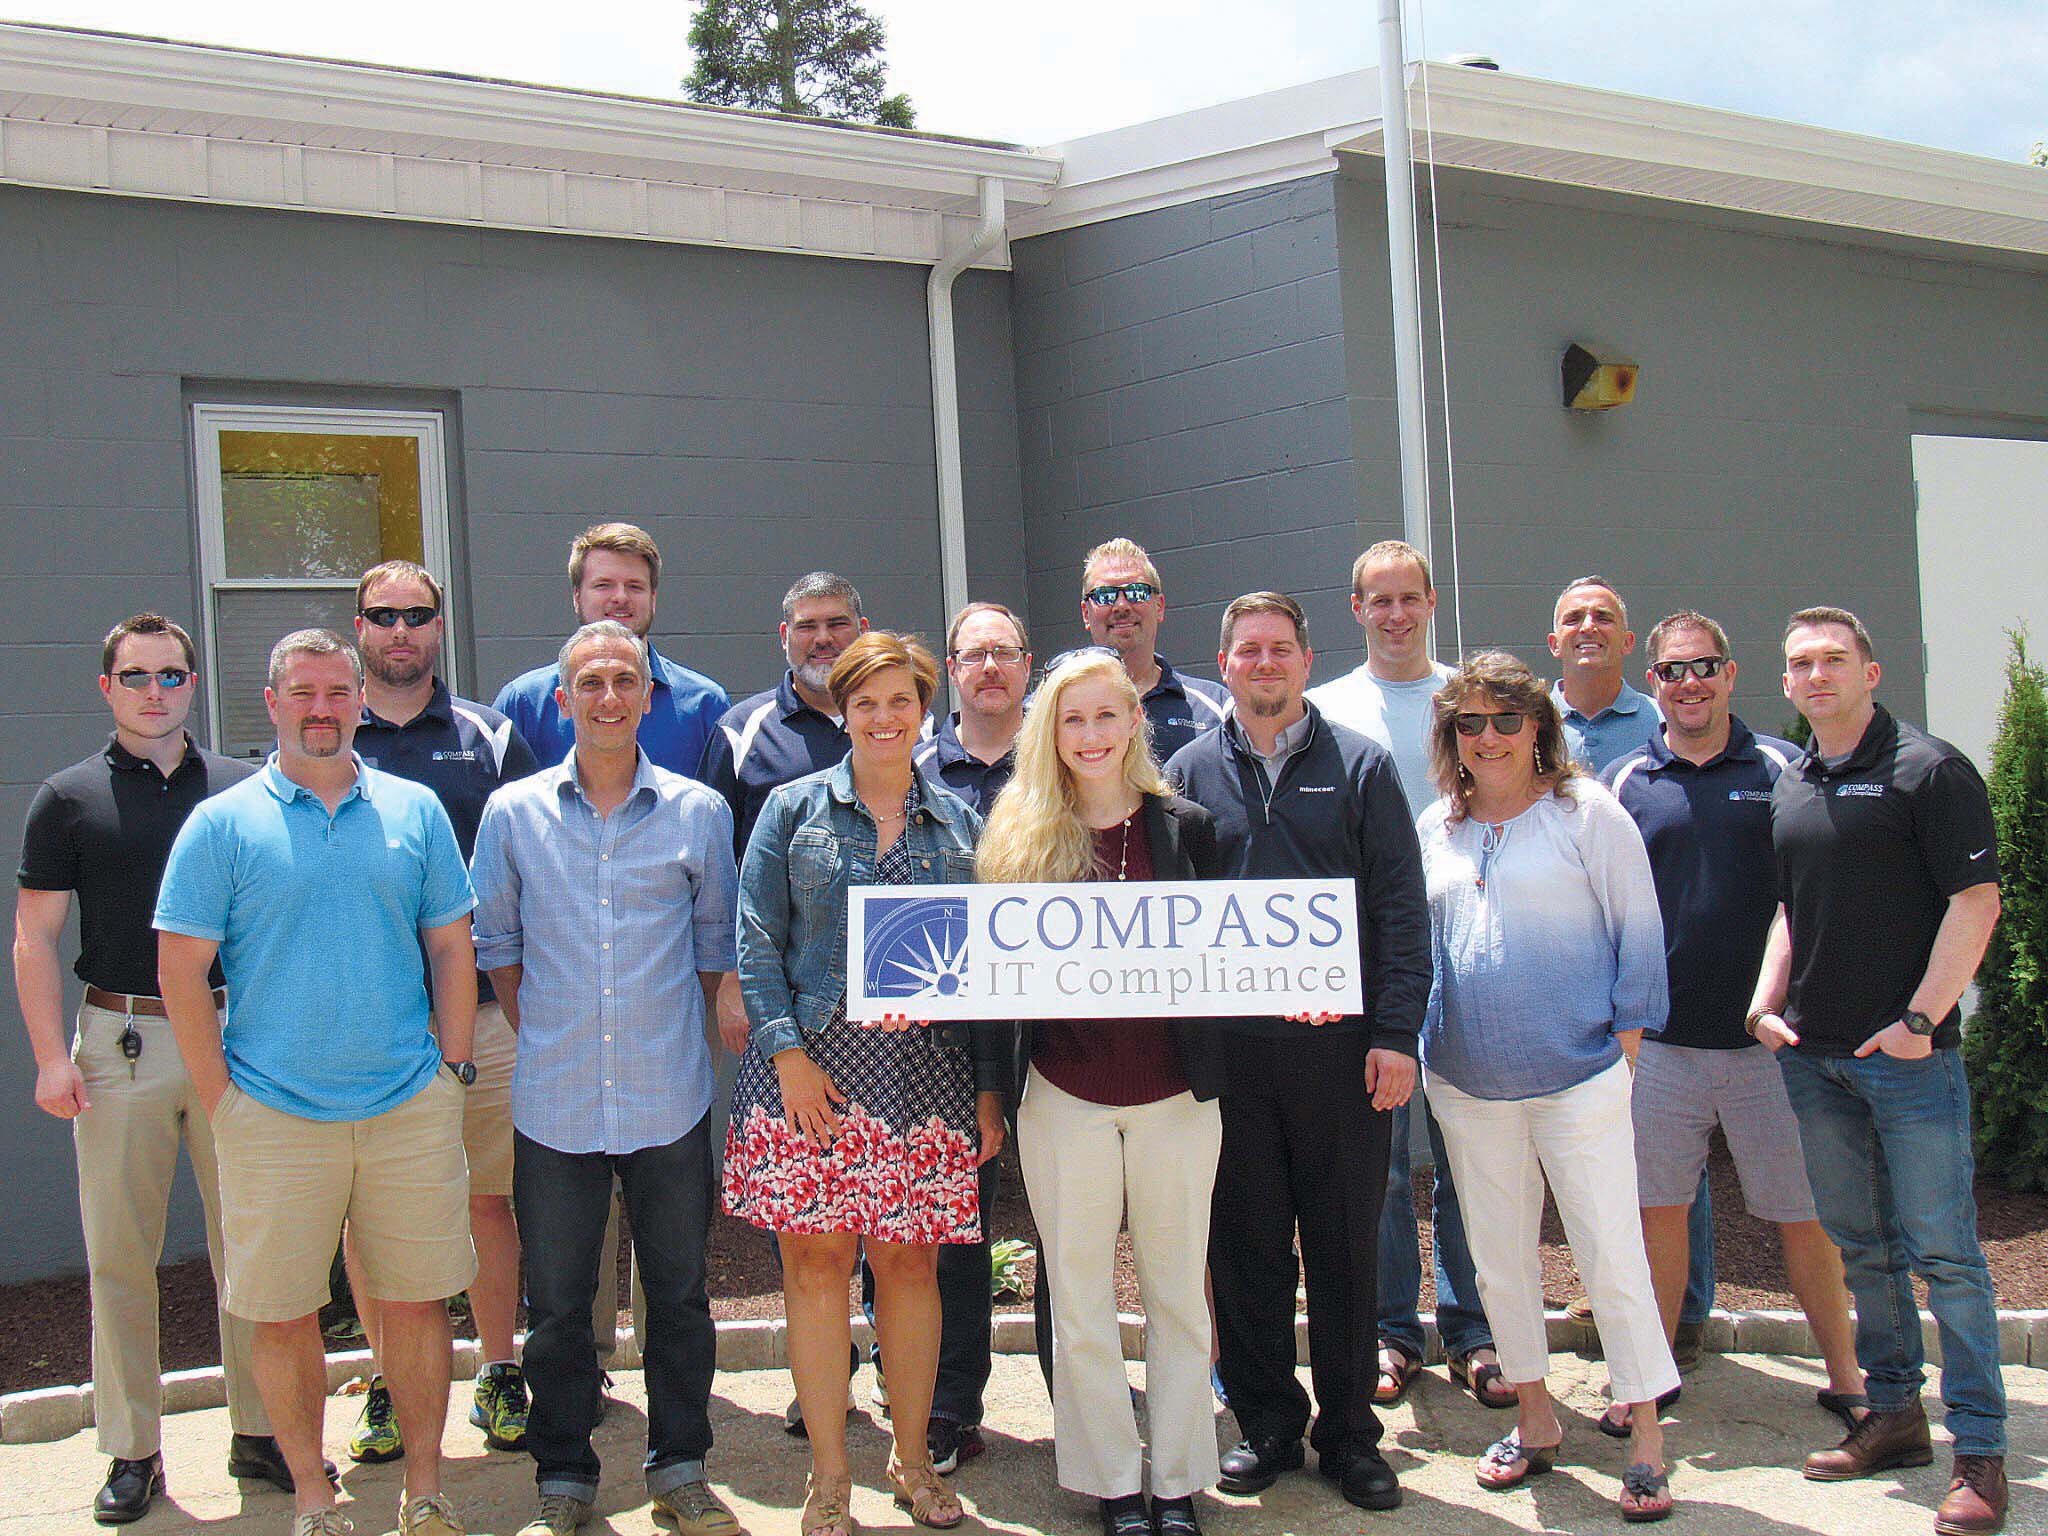 TEAM BUILDING: Compass IT Compliance makes sure that its staff, often out of town for work, gets the opportunities at the home office to connect and build the team. / COURTESY COMPASS IT COMPLIANCE